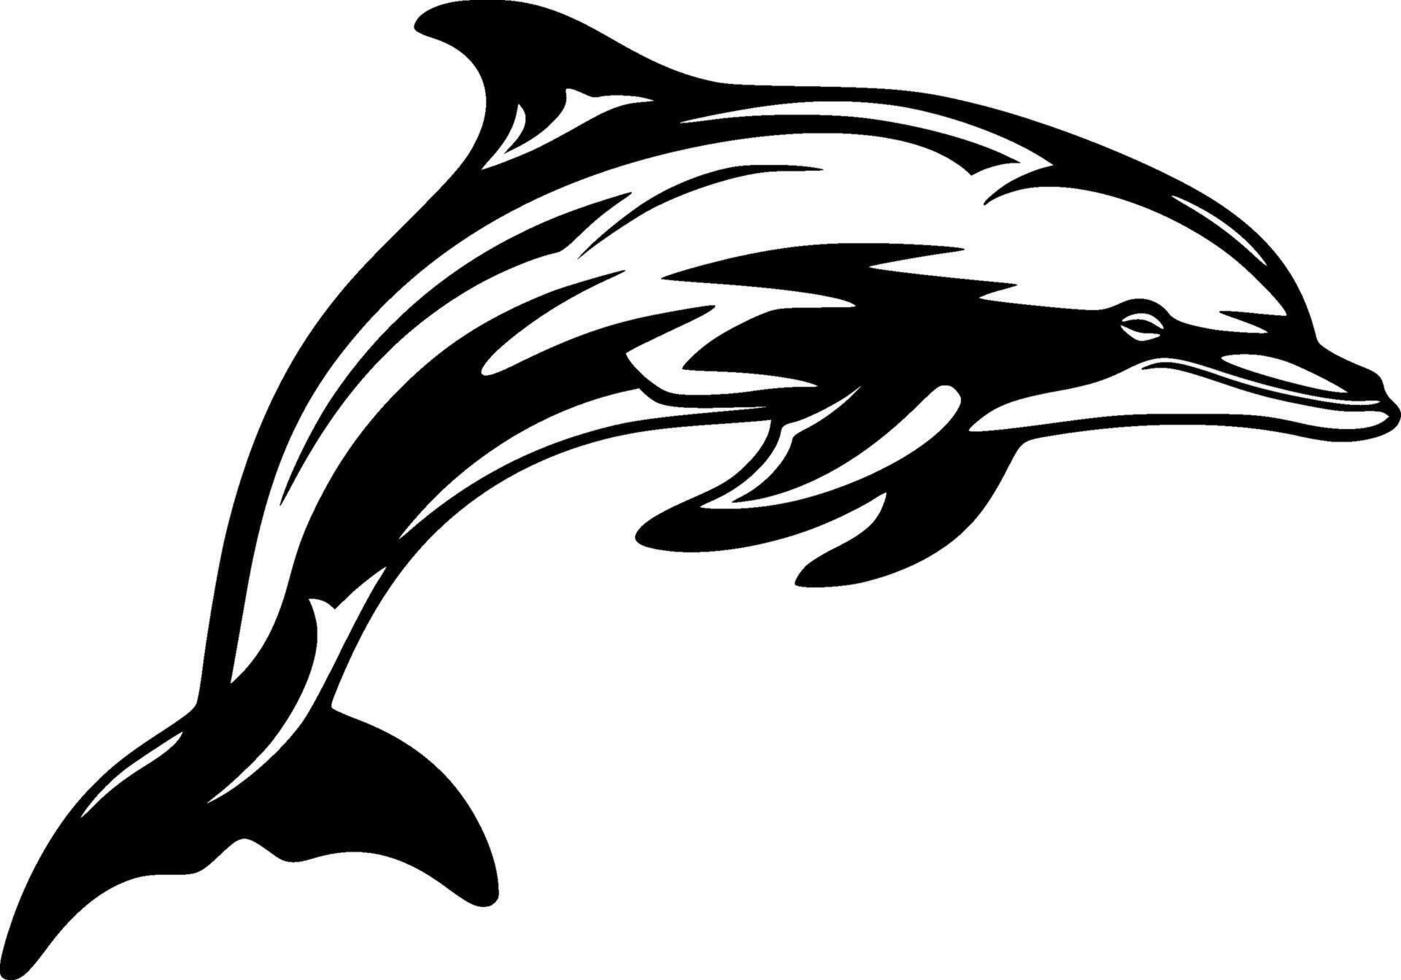 Dolphin - Black and White Isolated Icon - Vector illustration